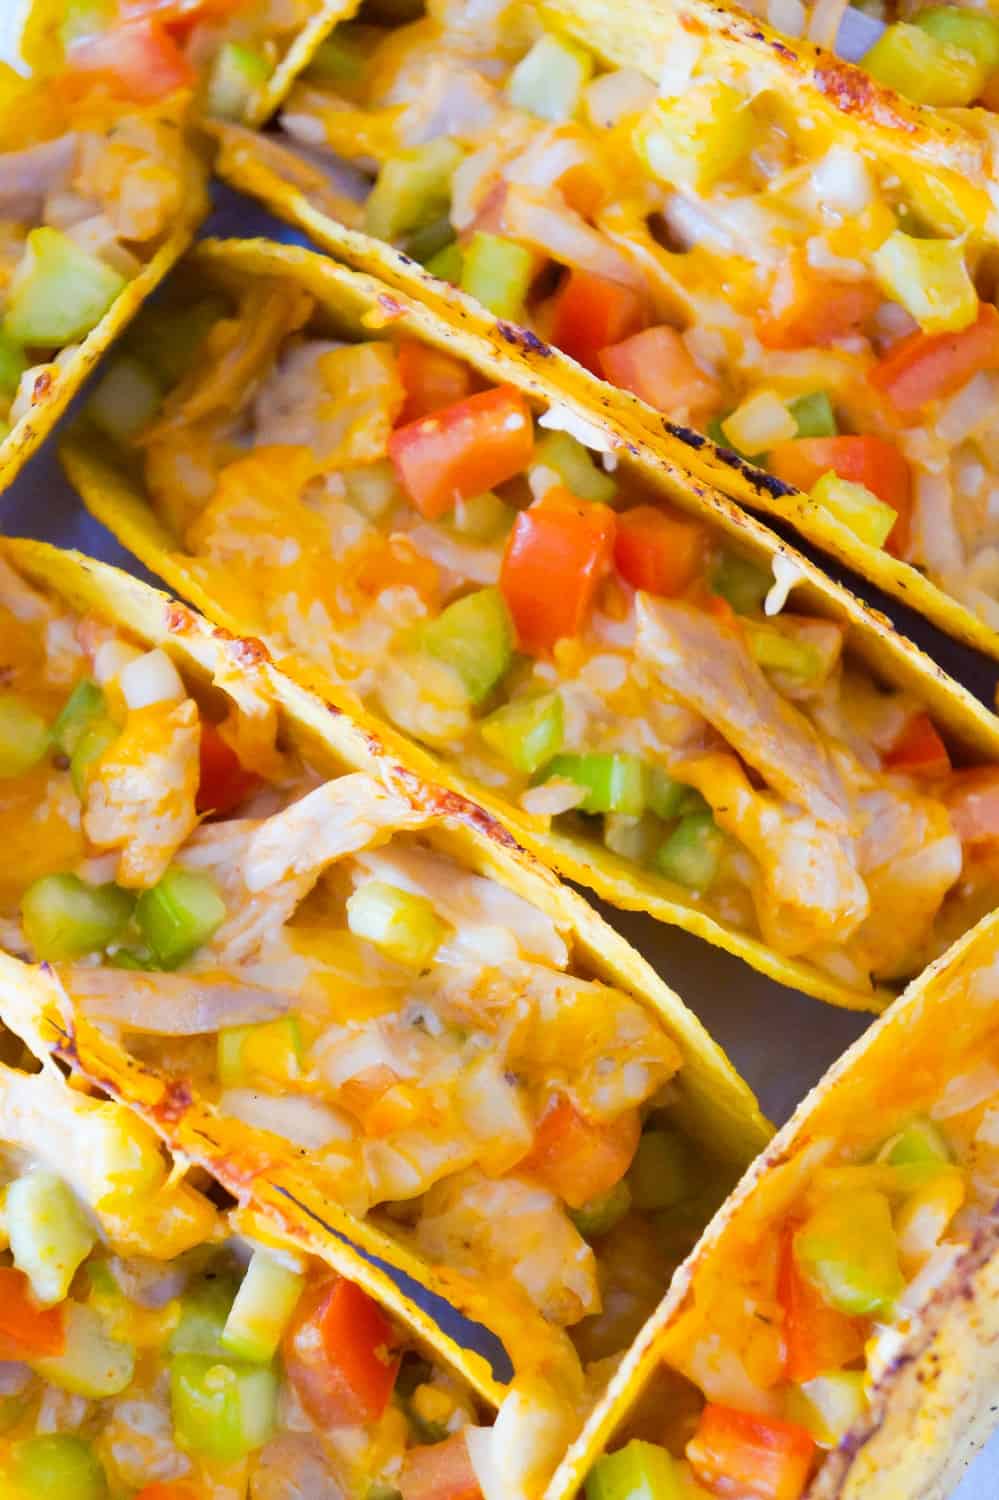 Buffalo Chicken Tacos are an easy dinner recipe using rotisserie chicken. These baked chicken tacos are loaded with buffalo sauce, ranch dressing, celery, tomatoes, onions and cheddar cheese.